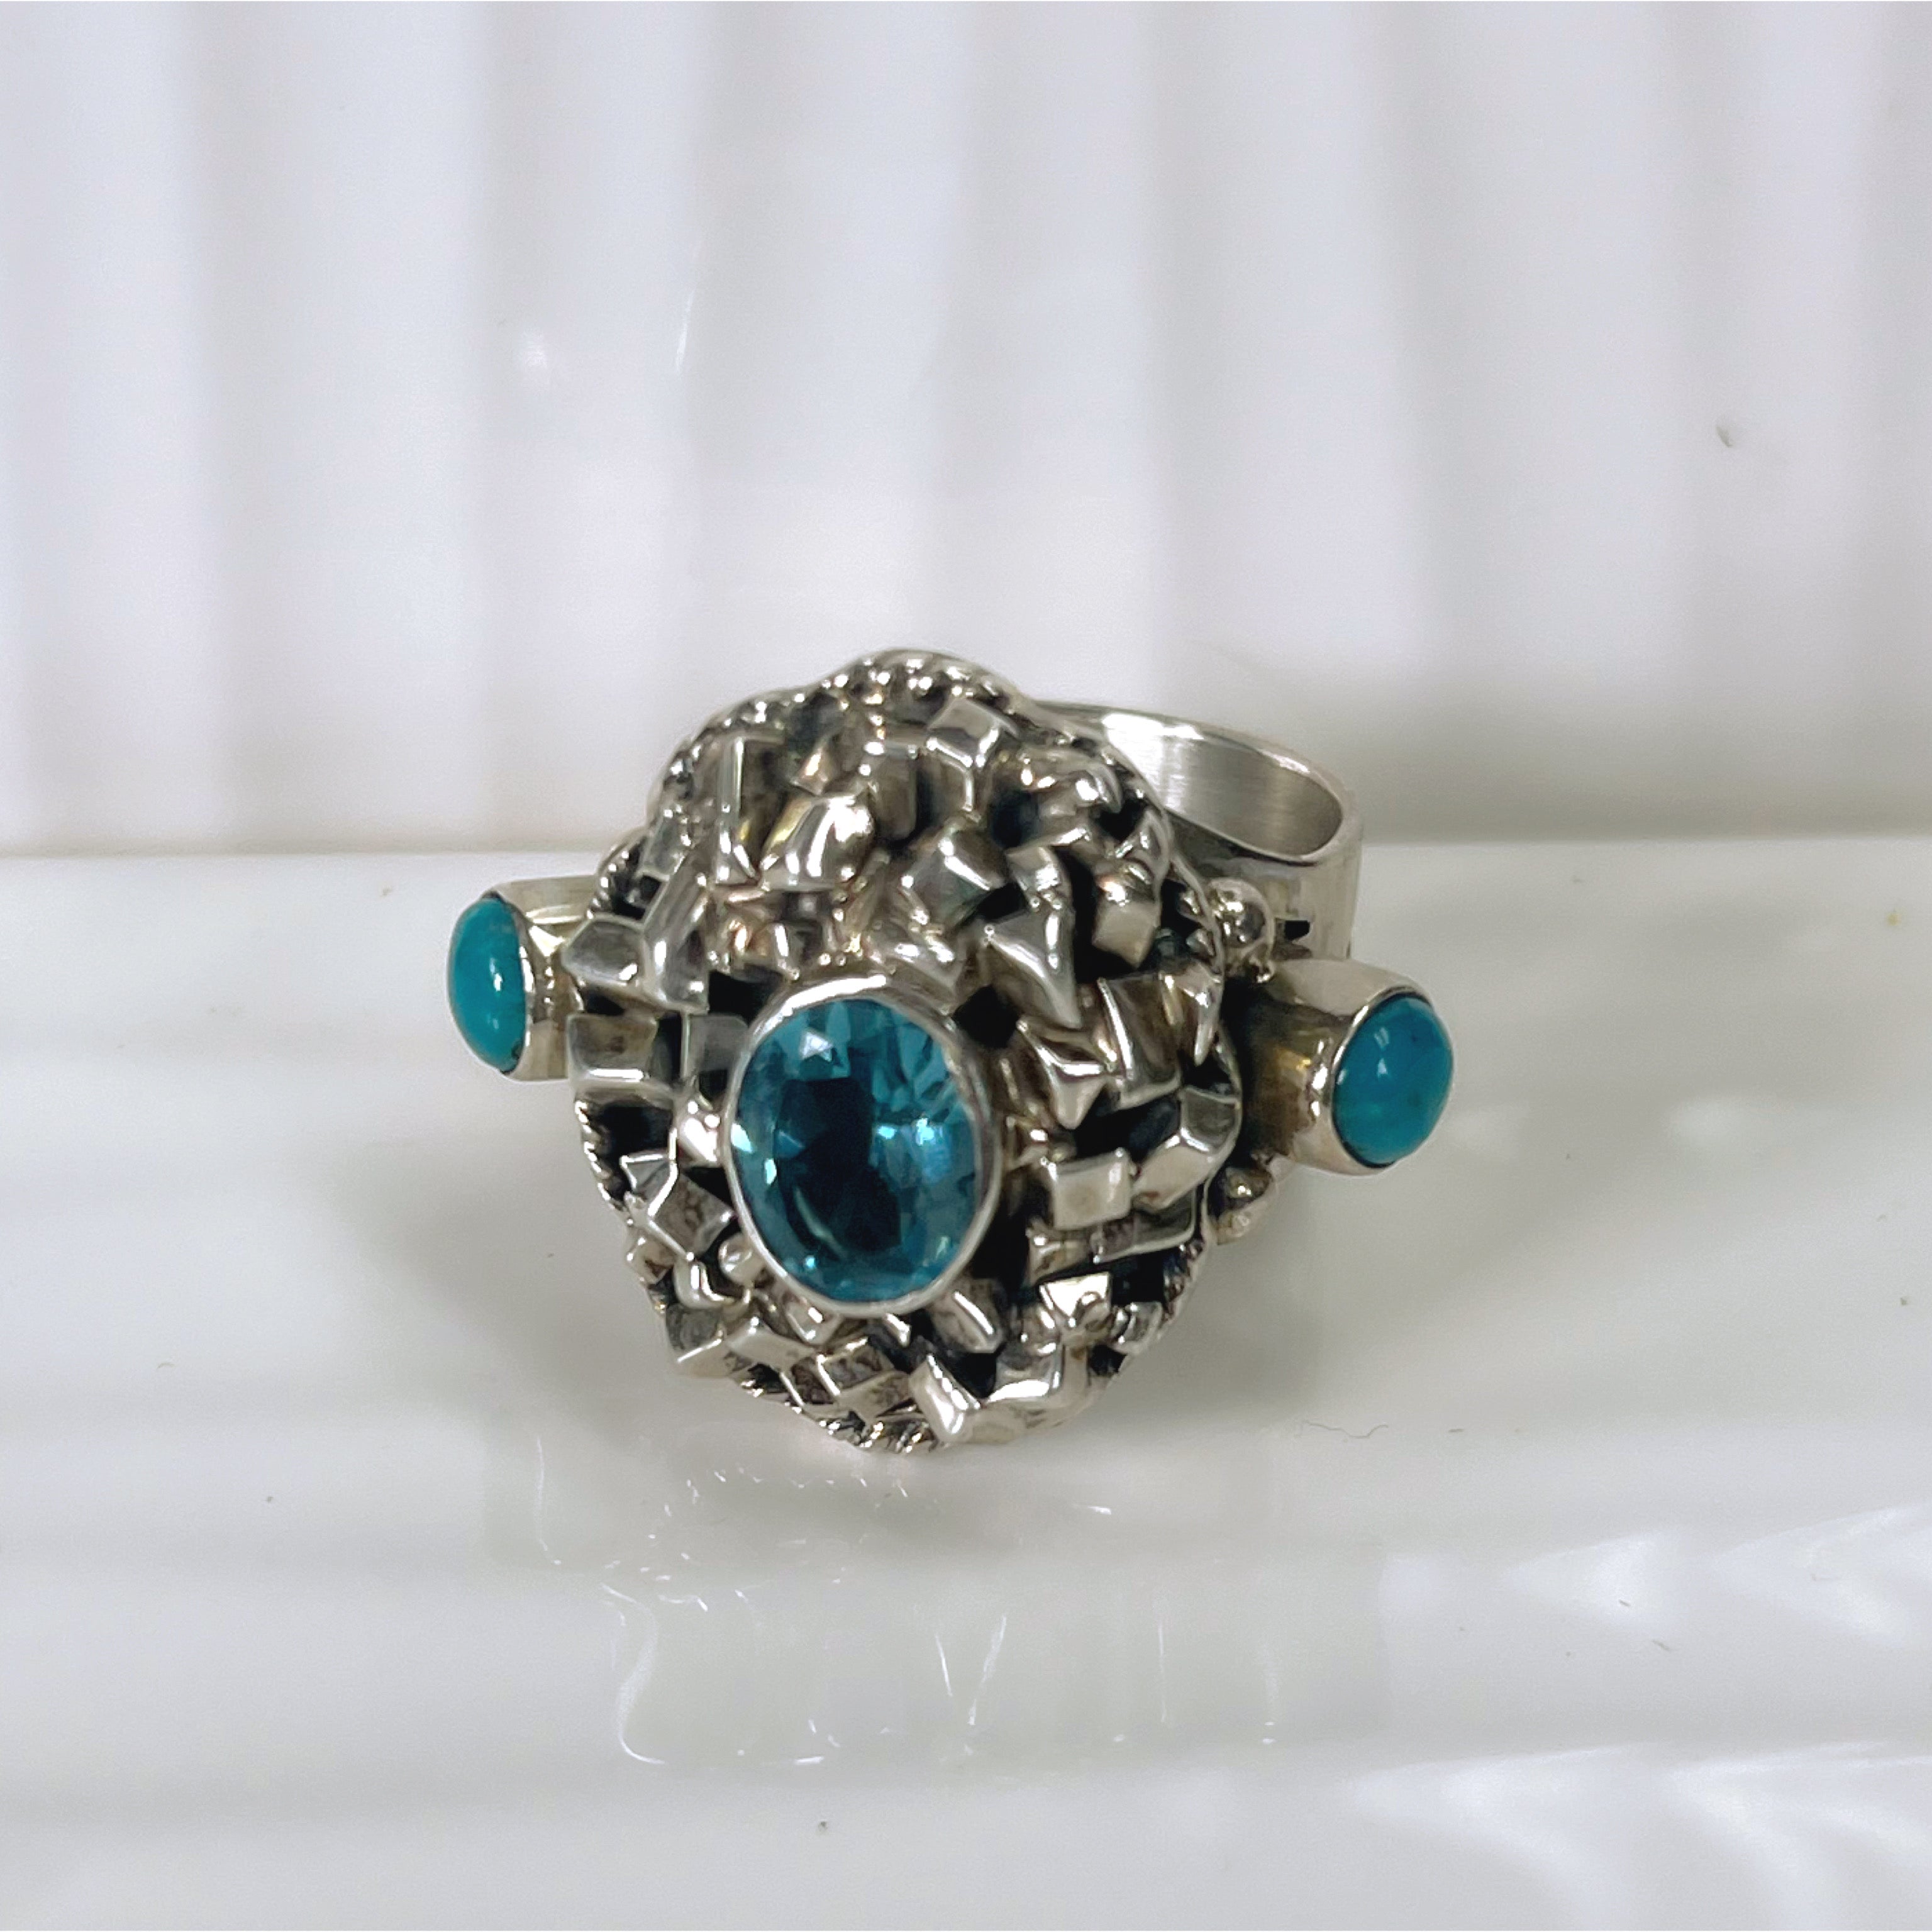 Happy Piasso sterling, aquamarine, and turquoise Navajo ring